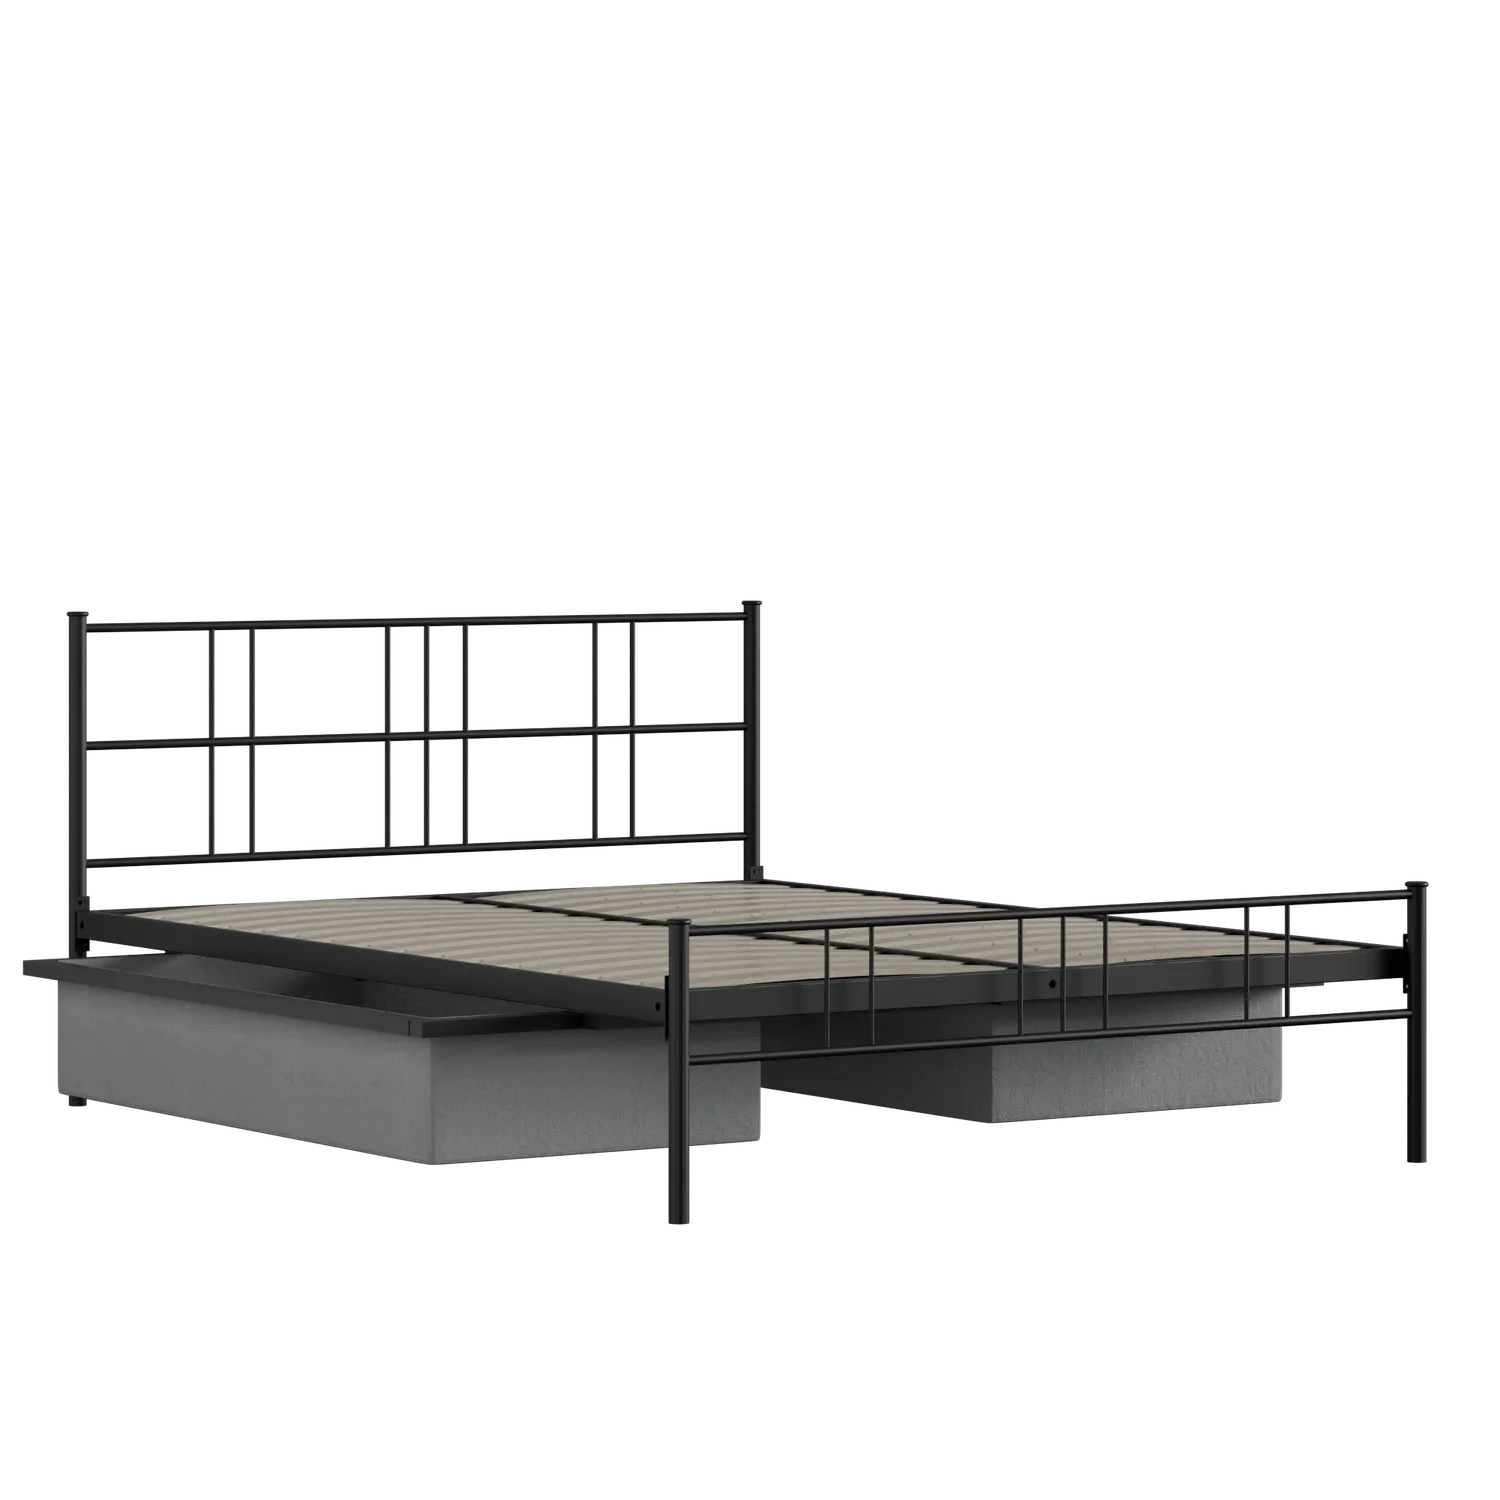 Mortlake iron/metal bed in black with drawers